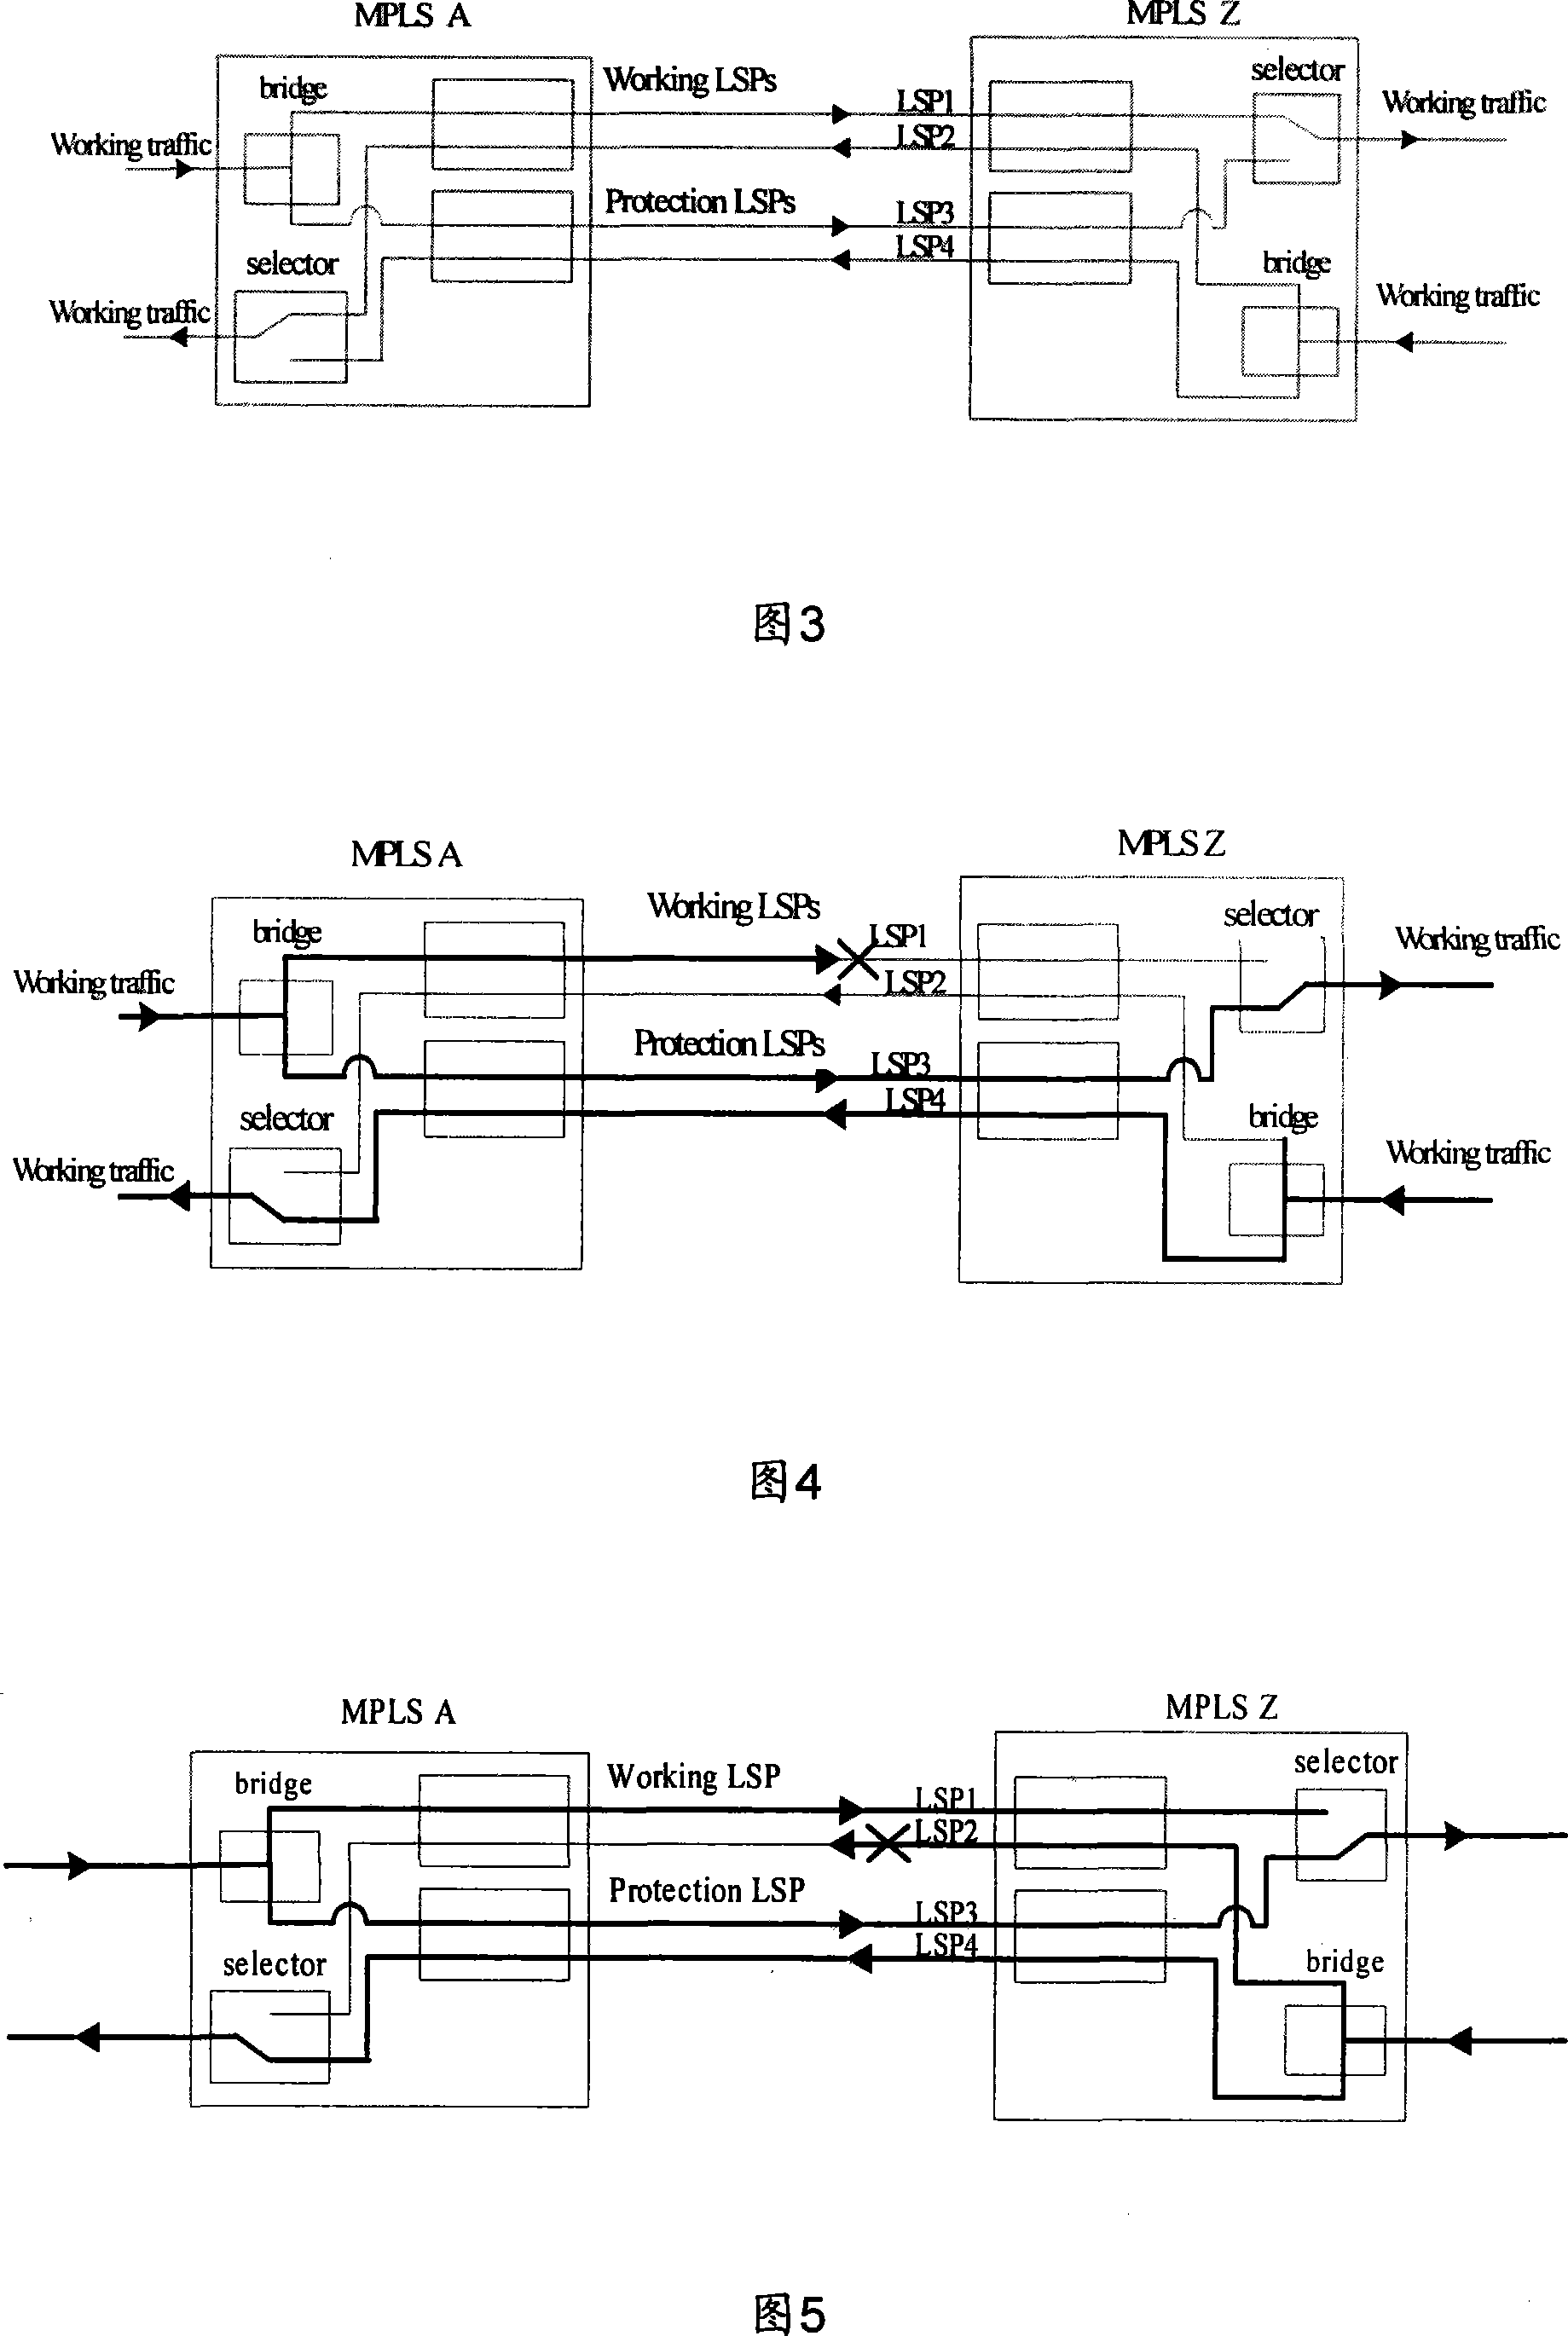 Implementation method for bidirectional protective switching of multi-protocol label switching